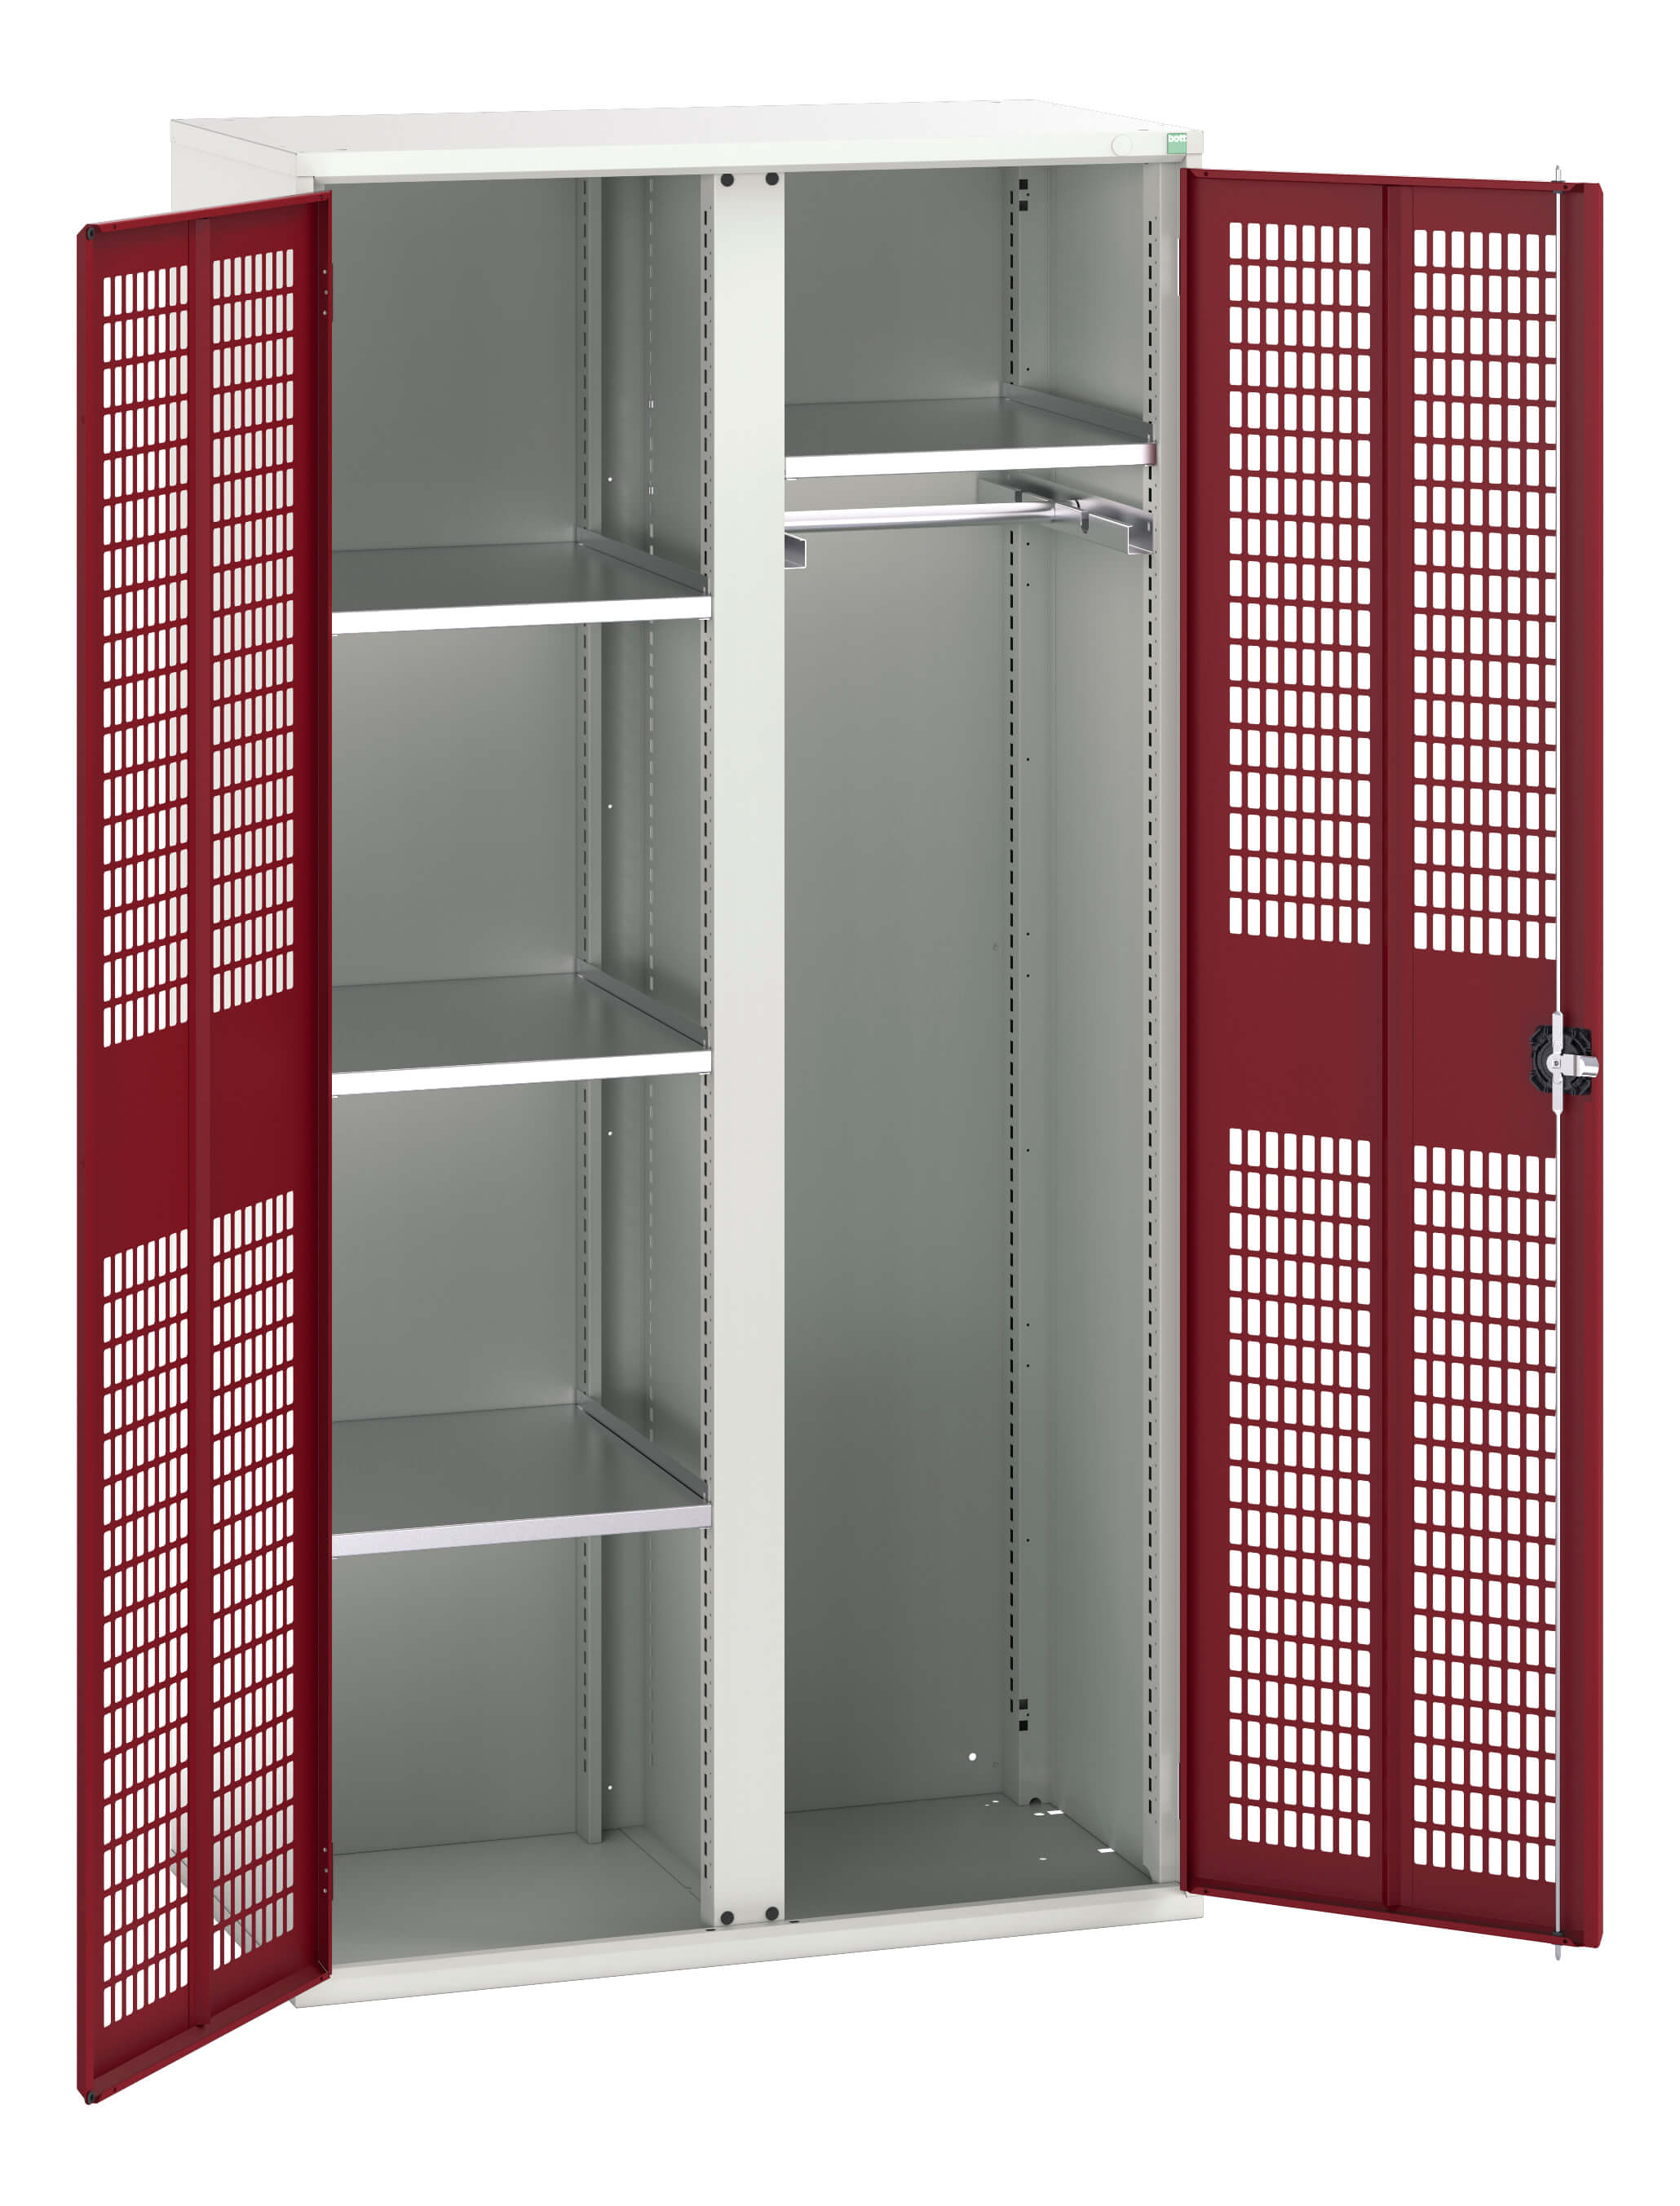 Bott Verso Ventilated Door Ppe / Janitorial Kitted Cupboard With Vertical Partition - 16926774.24